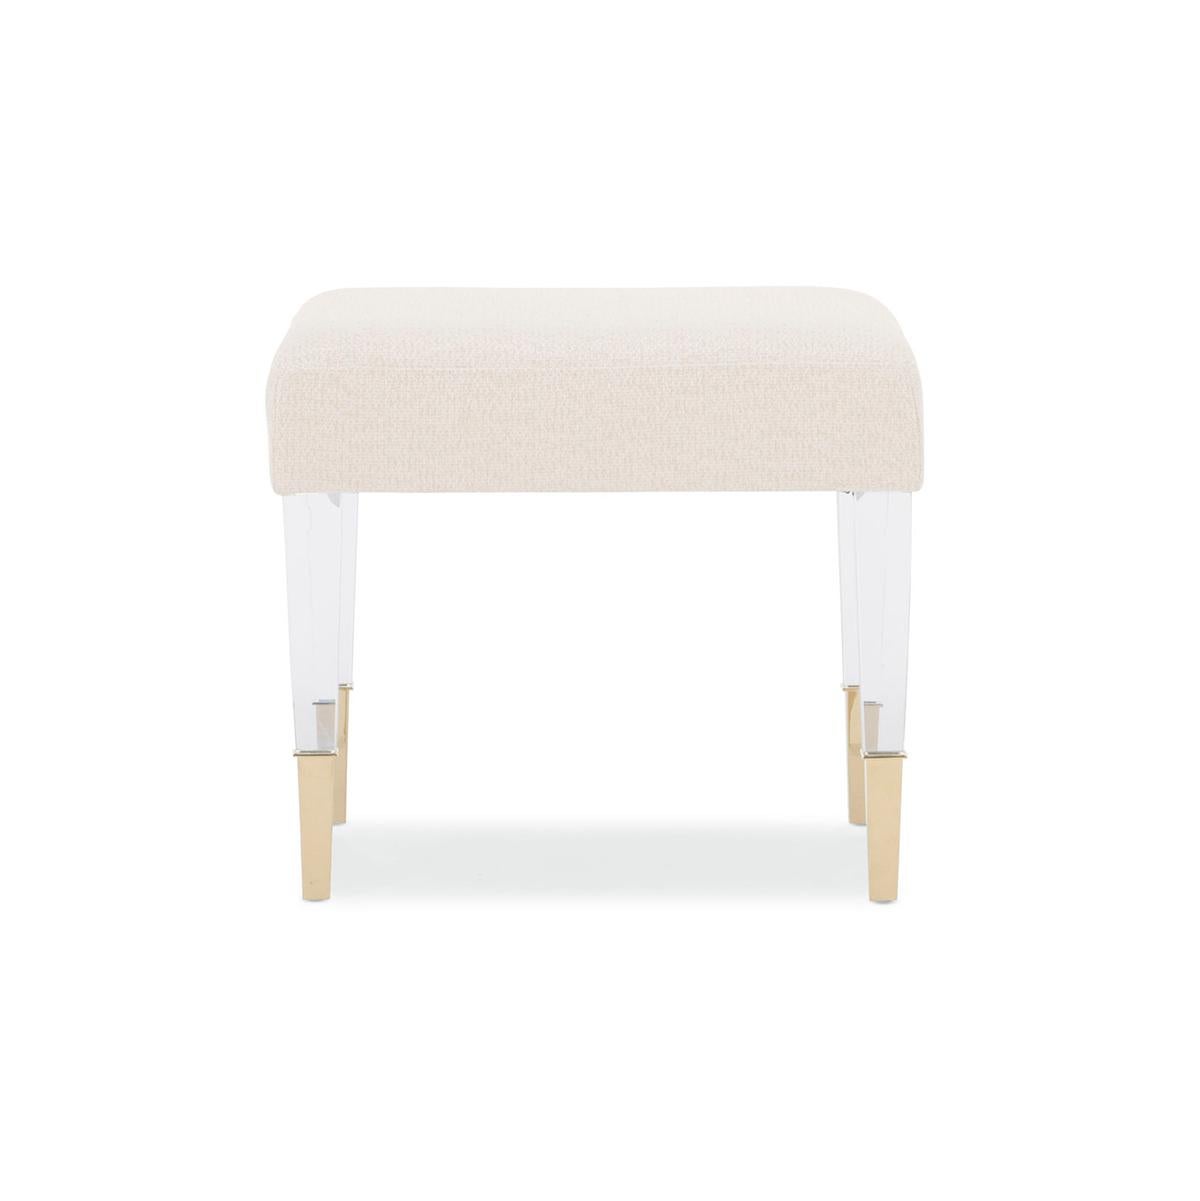 While petite in size, its charming character makes a big impact. It wears a luxurious, soft neutral fabric and sits upon chic acrylic legs capped with metal ferrules in a sparkling Whisper of Gold finish.

Drawing on a visually intriguing mix of